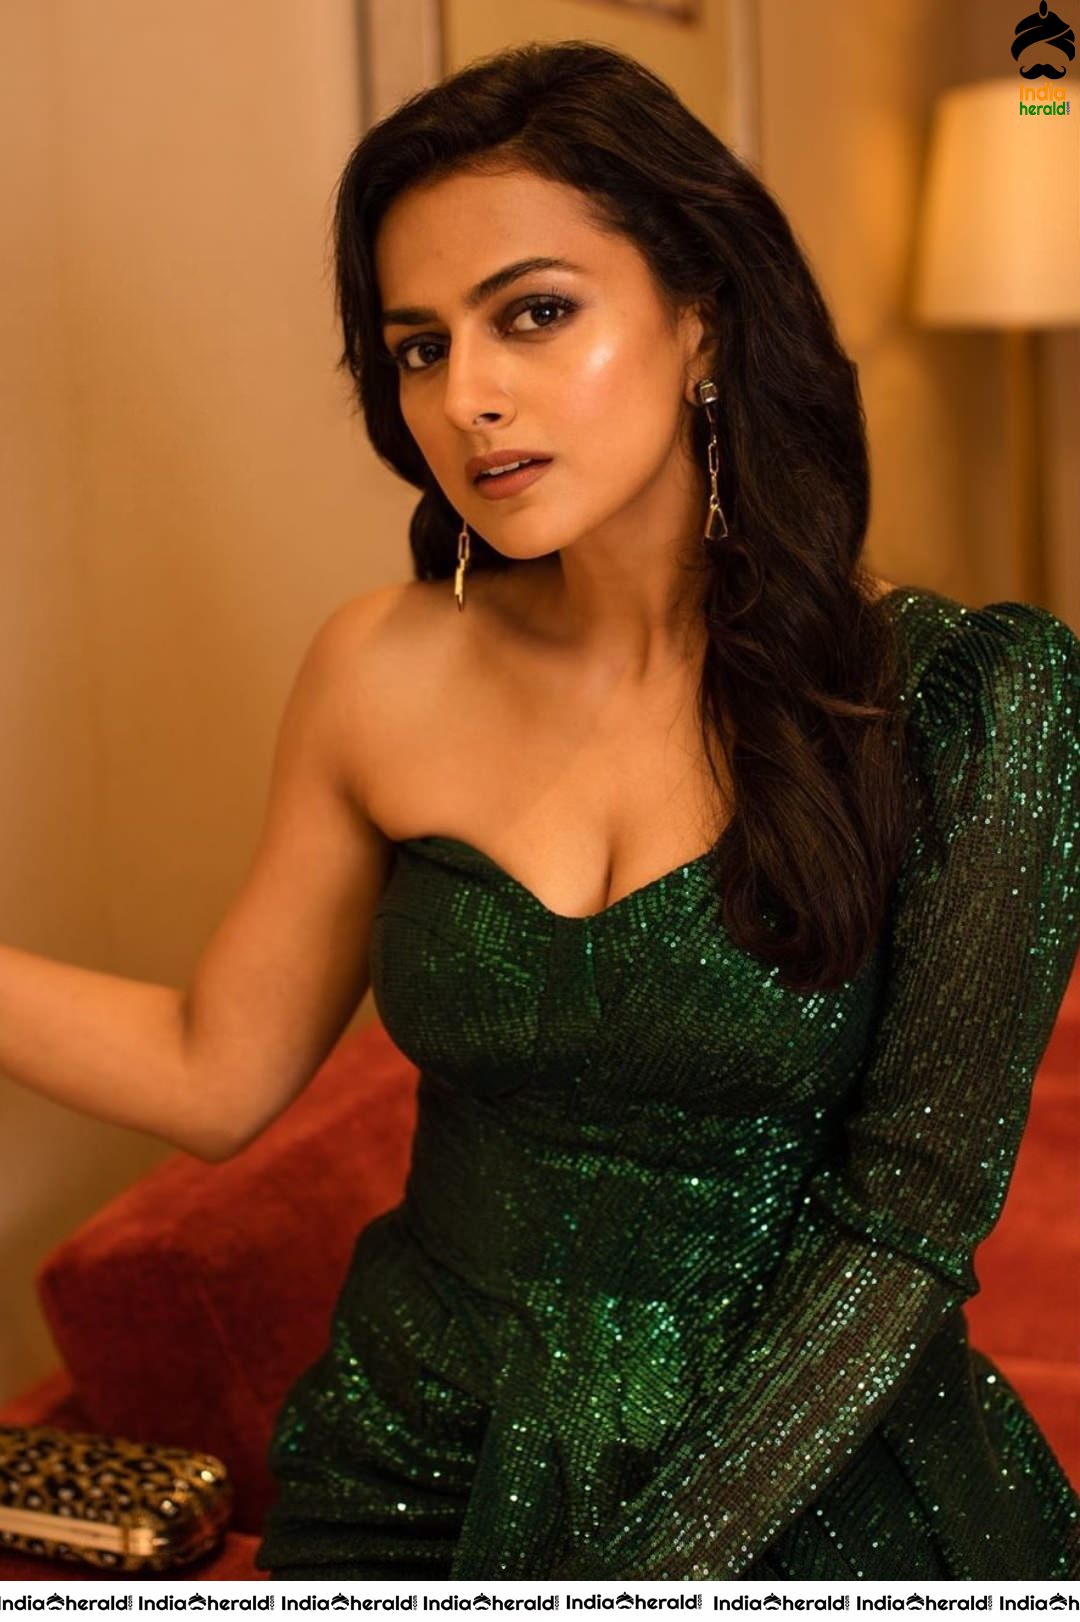 Shraddha Srinath Hot Cleavage Exposing Photos after award show event